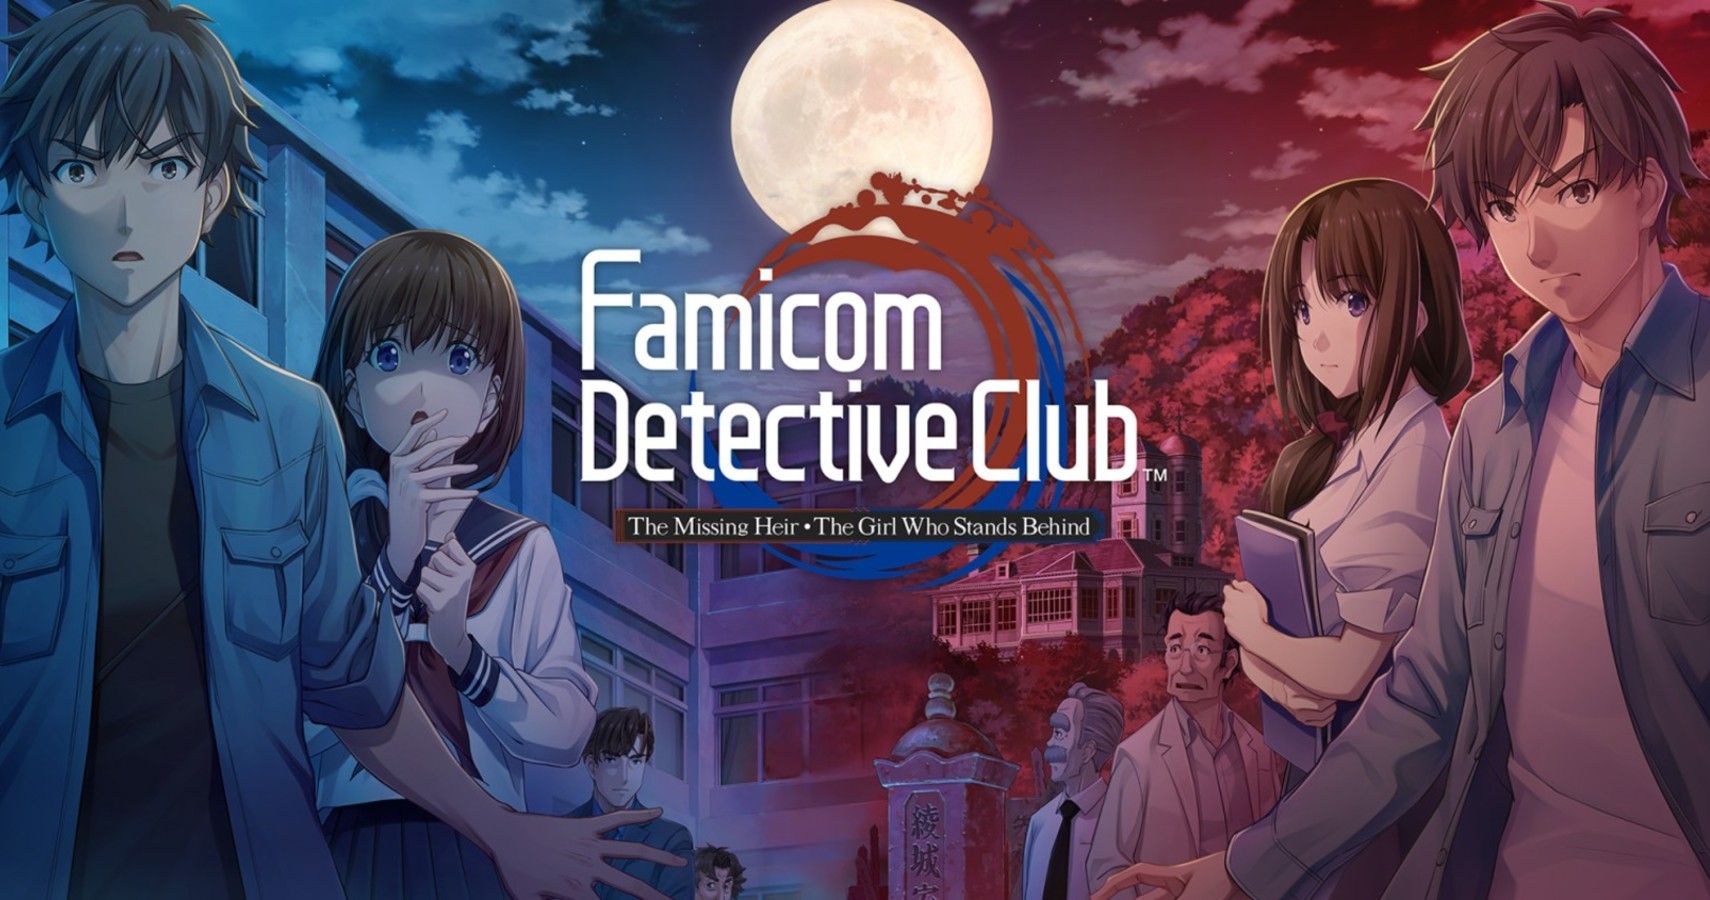 Official Art for Famicom Detective Club on Nintendo Switch